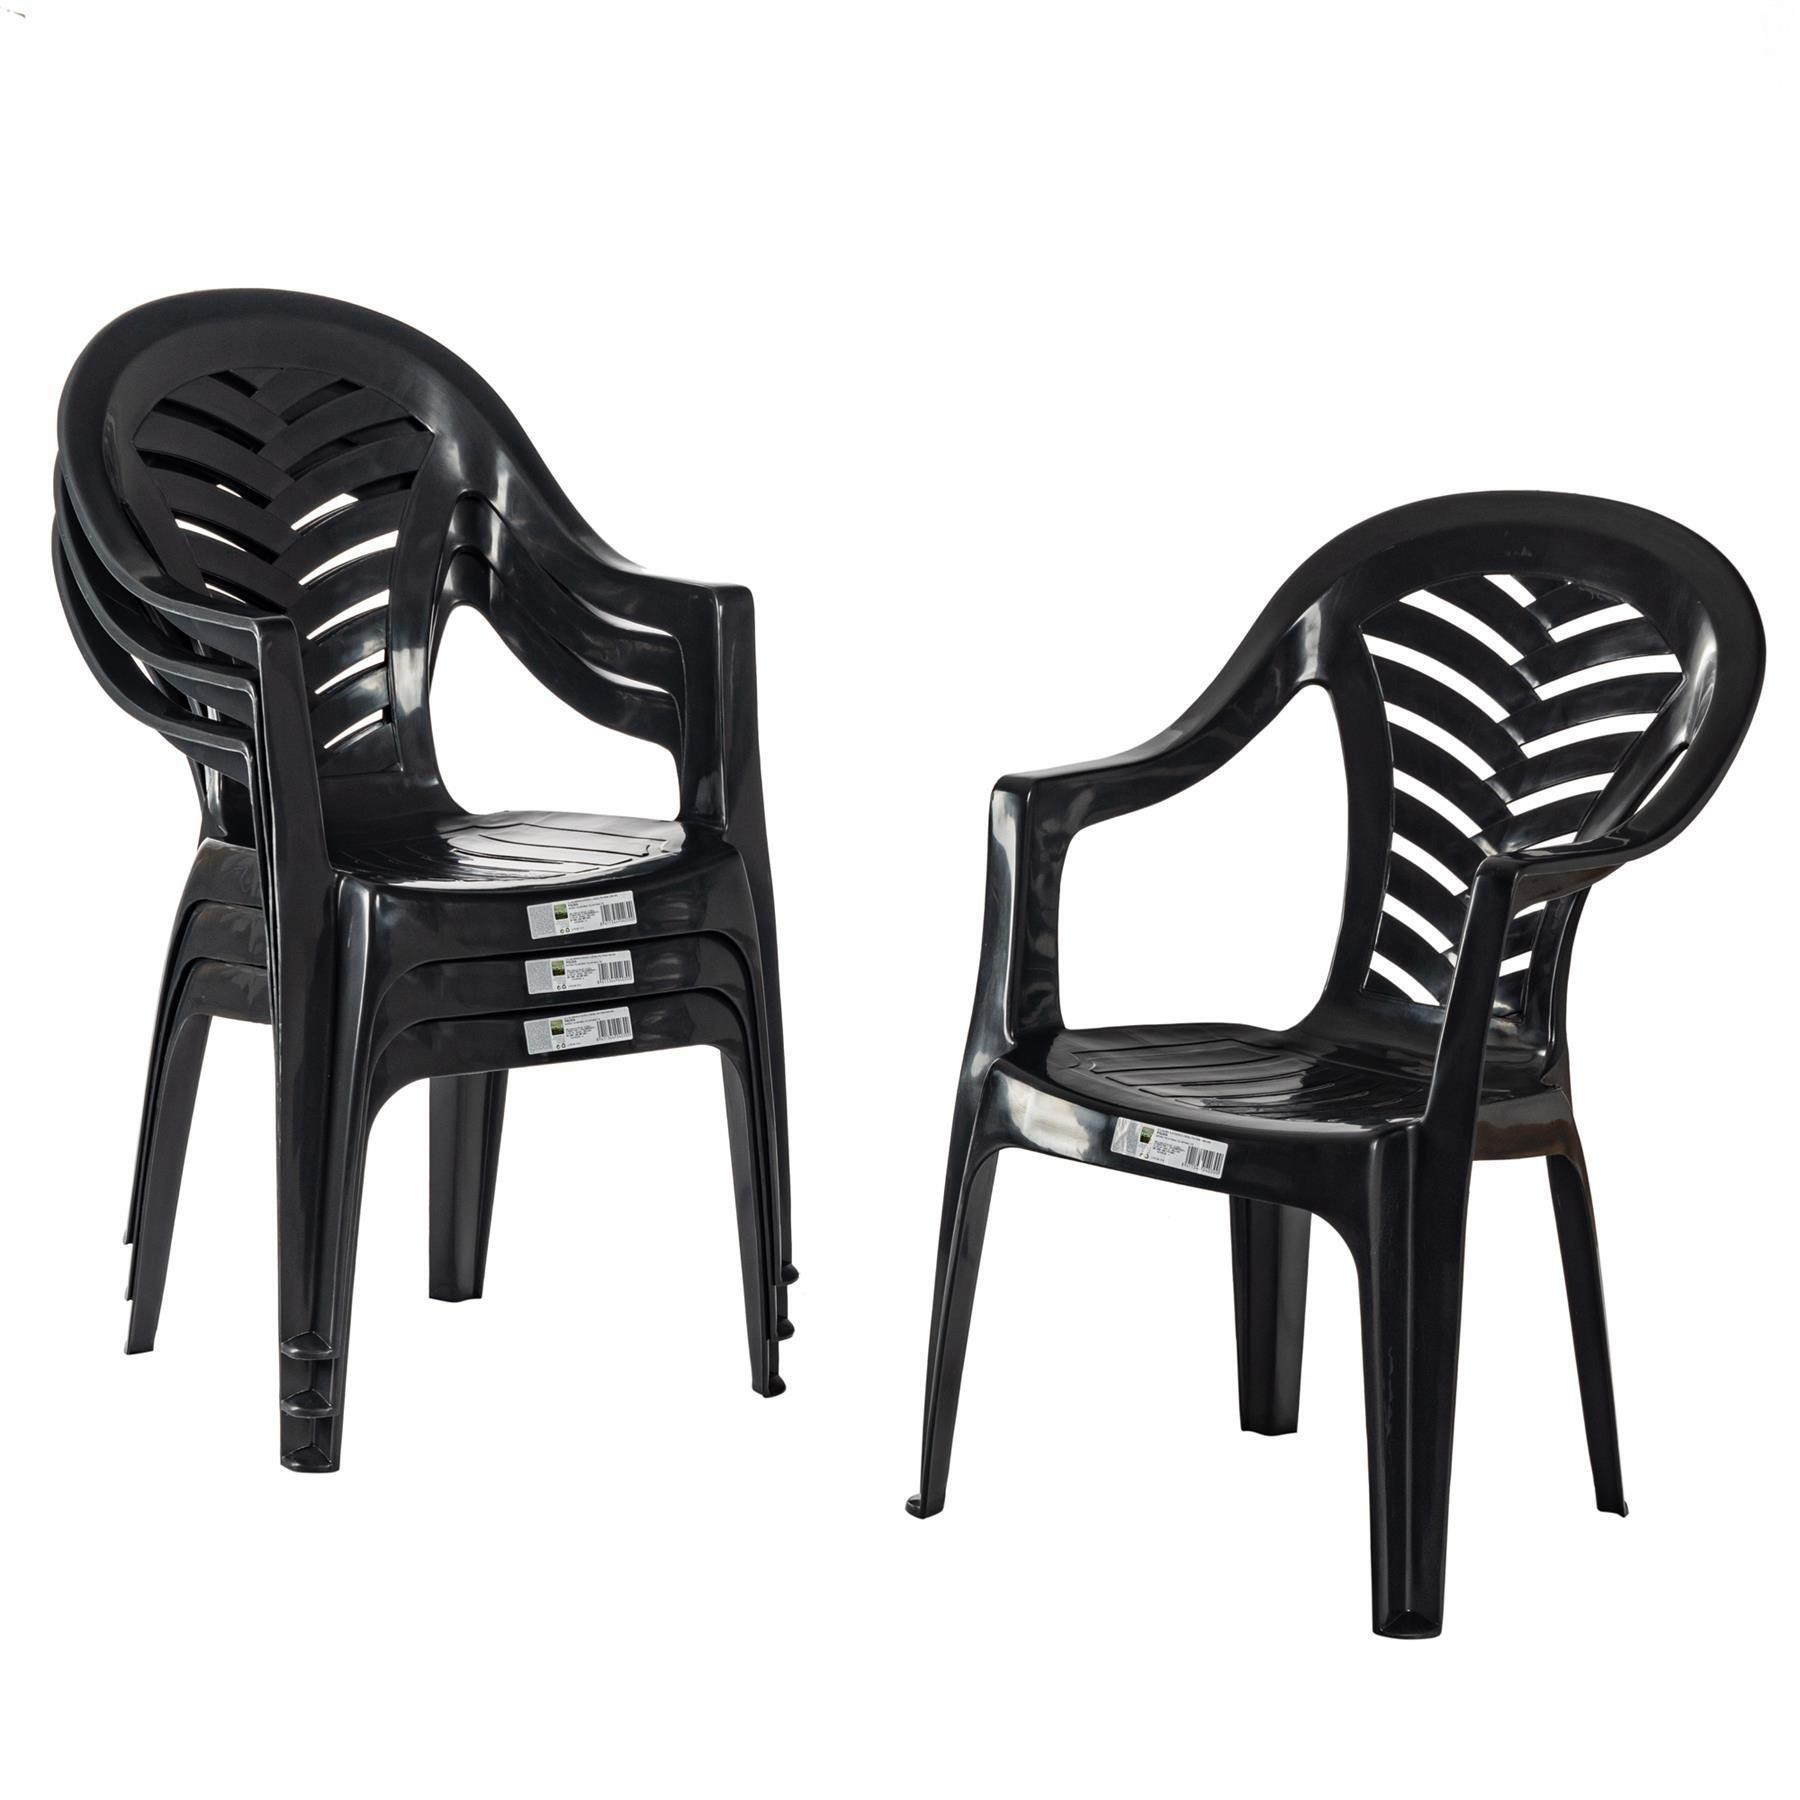 Palma Garden Dining Chairs Pack of 4 - image 1